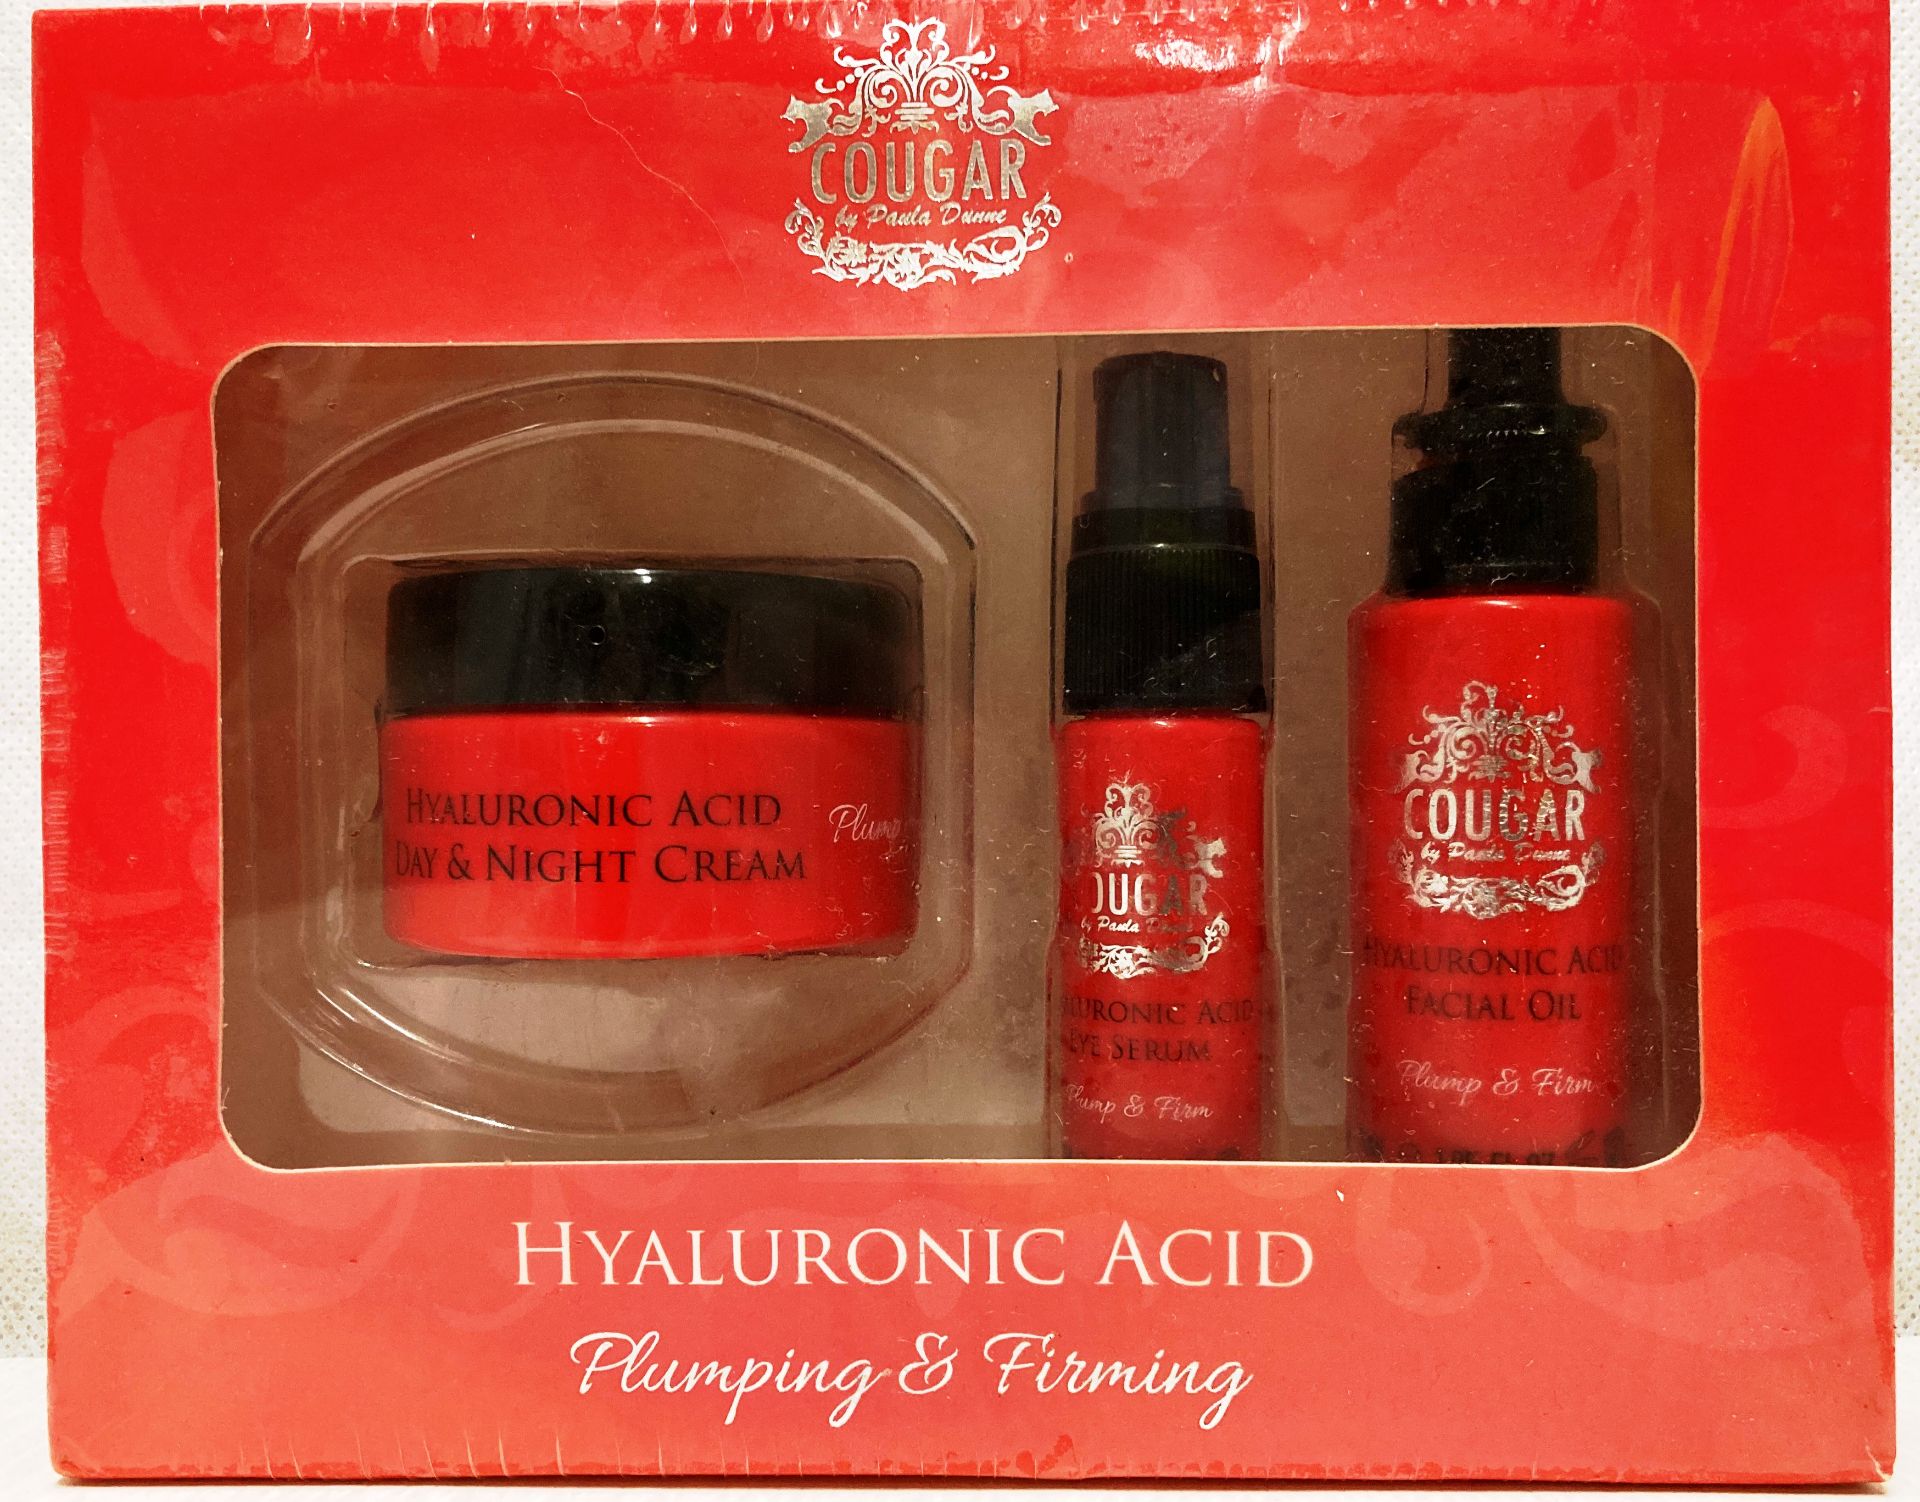 10 x Cougar Hyaluronic Acid Plumping and Firming sets